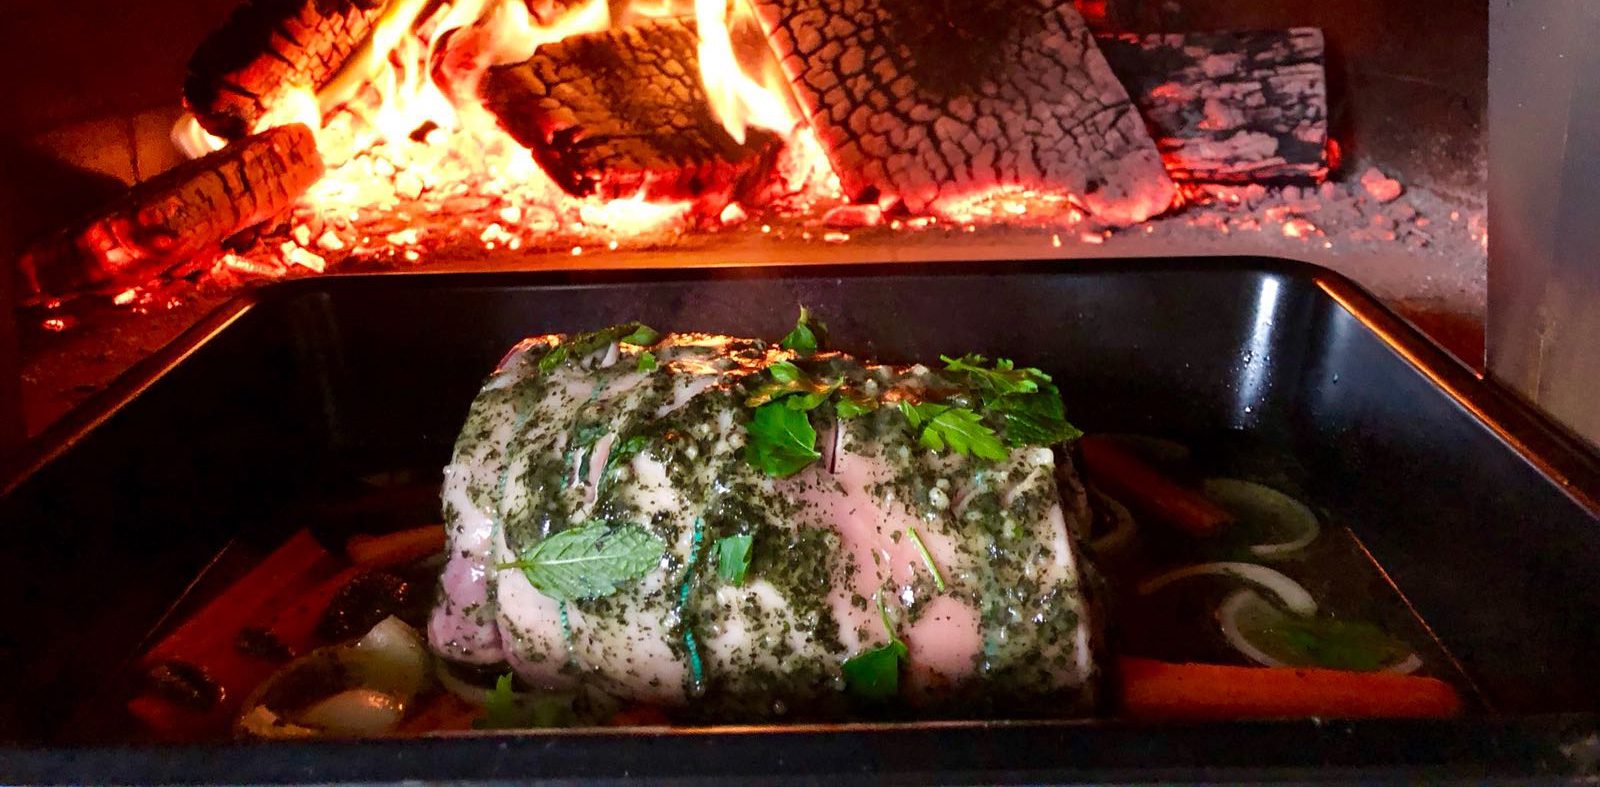 Cooking in your wood fired Amigo Oven during the winter months